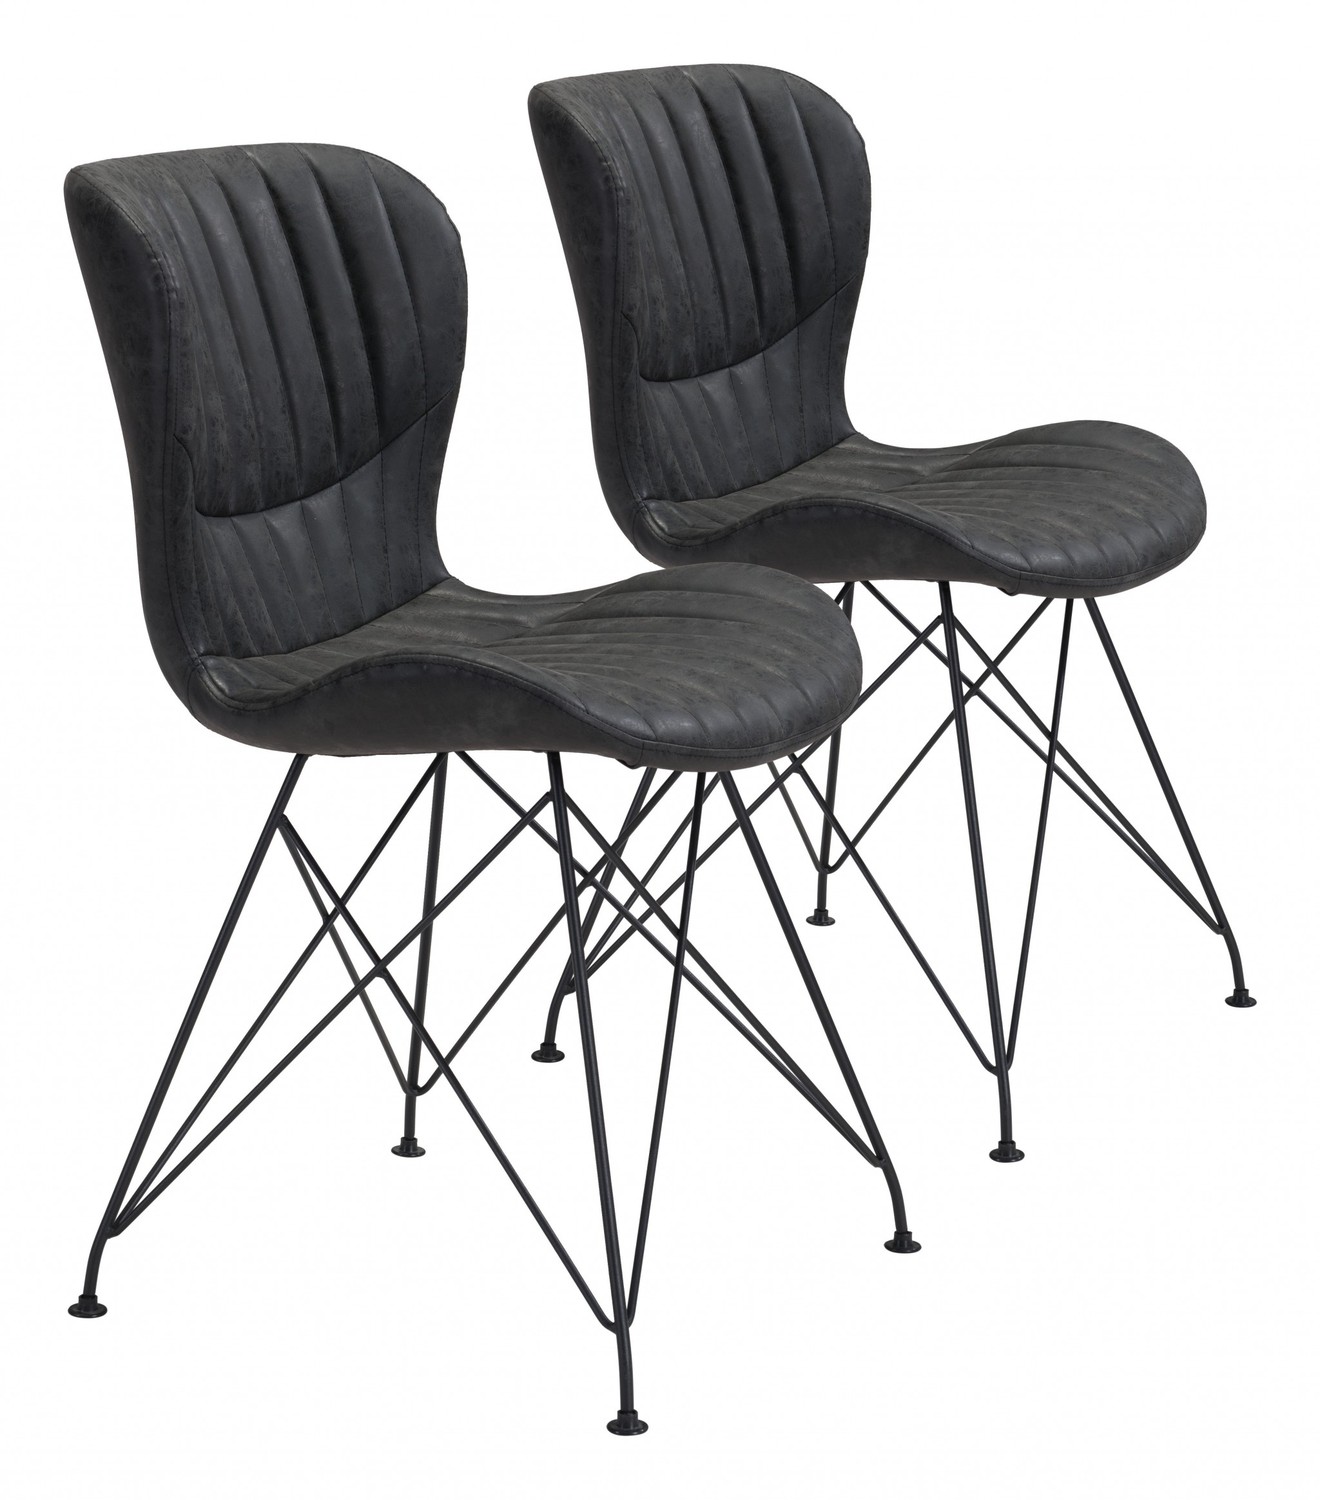 Set of Two Black Faux Leather Boho Chip Dining Chair